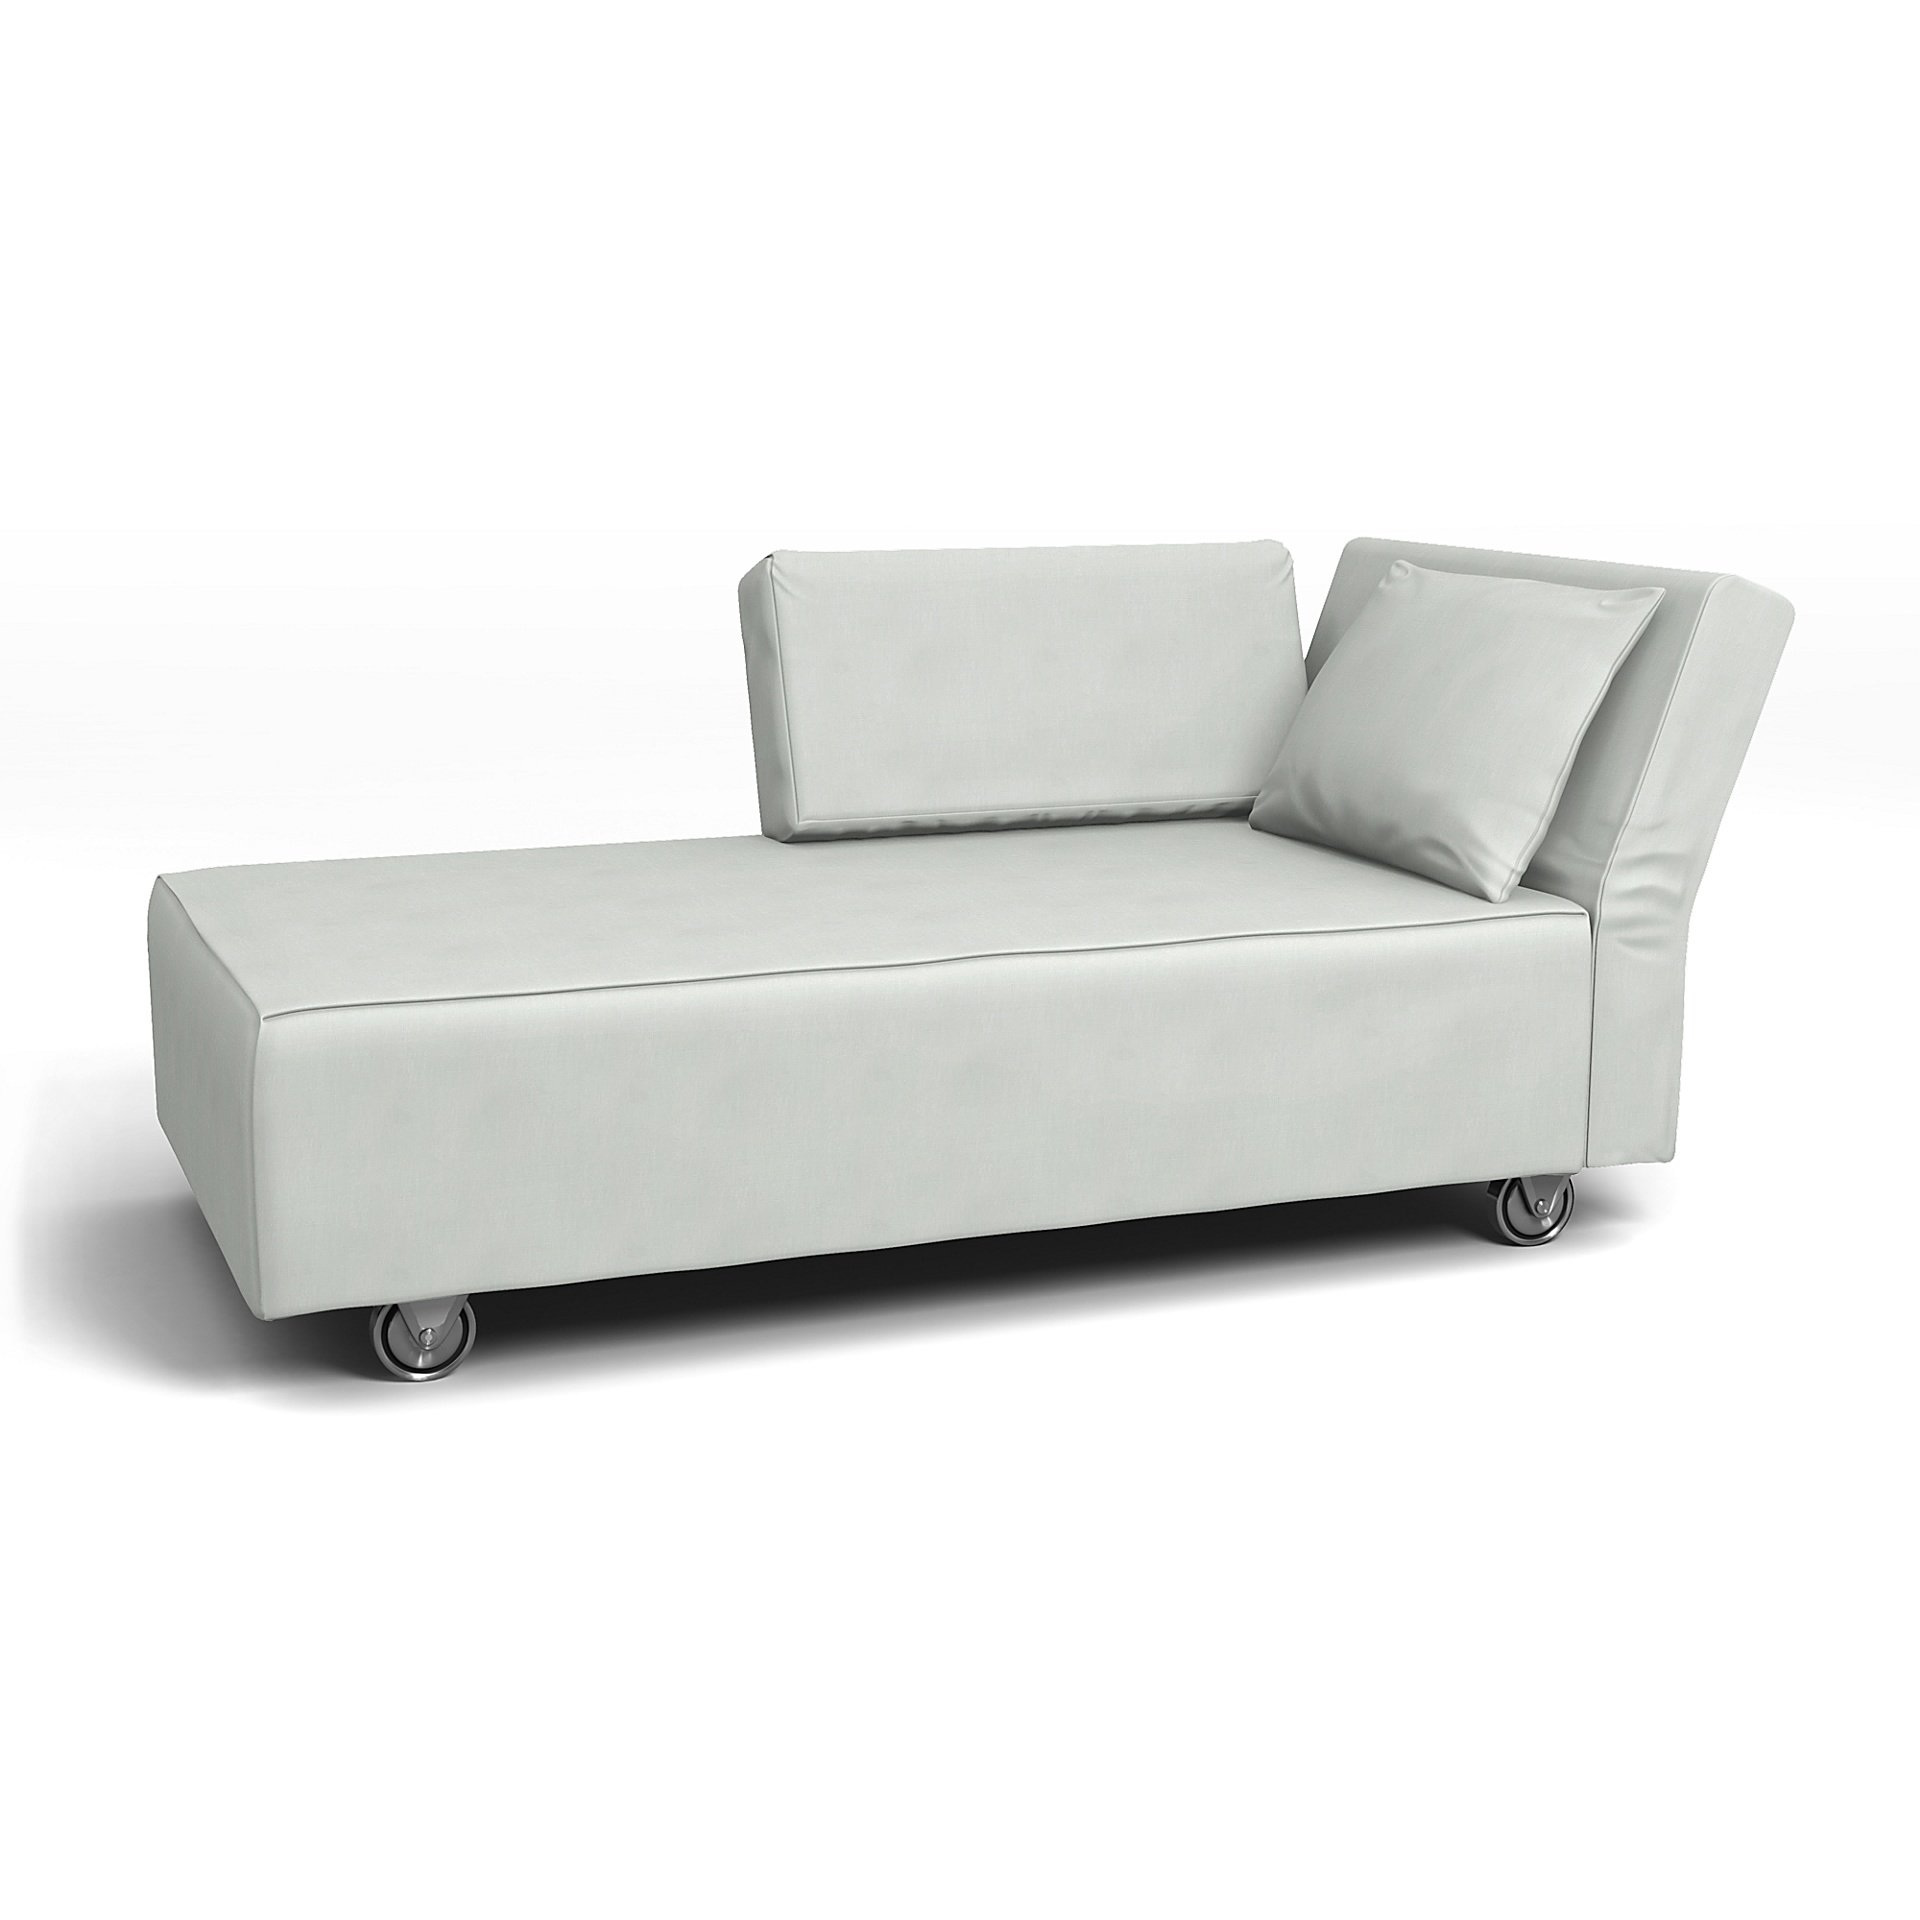 IKEA - Falsterbo Chaise with Right Armrest Cover, Silver Grey, Linen - Bemz